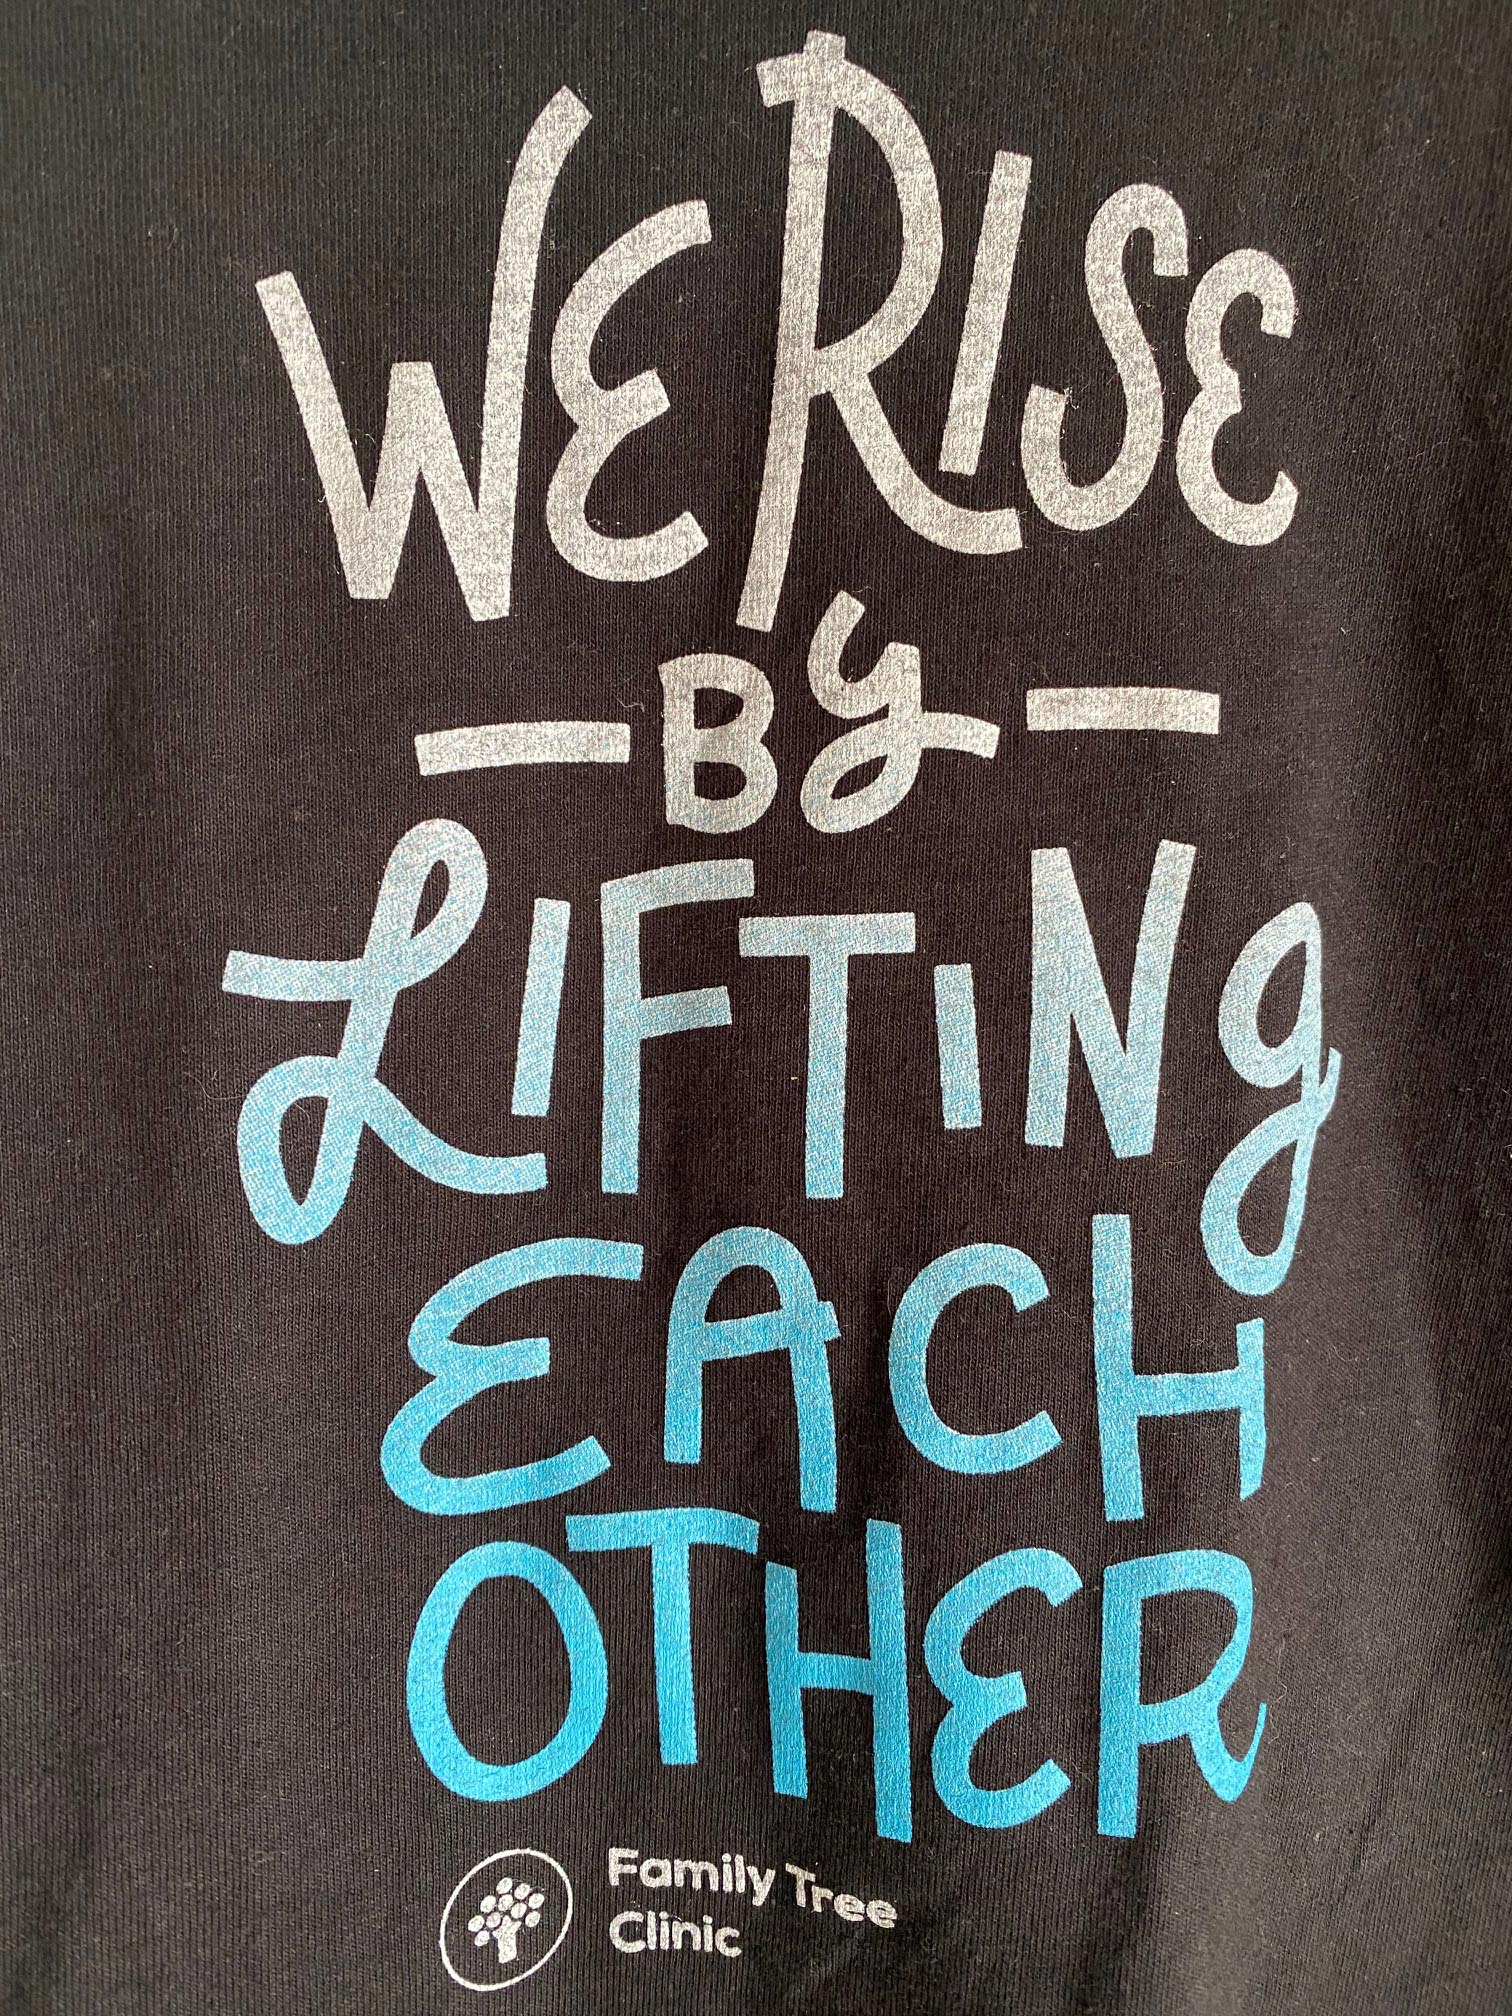 Alison Nowak, We Rise by Lifting Each Other, 2020, Screen printed t-shirt